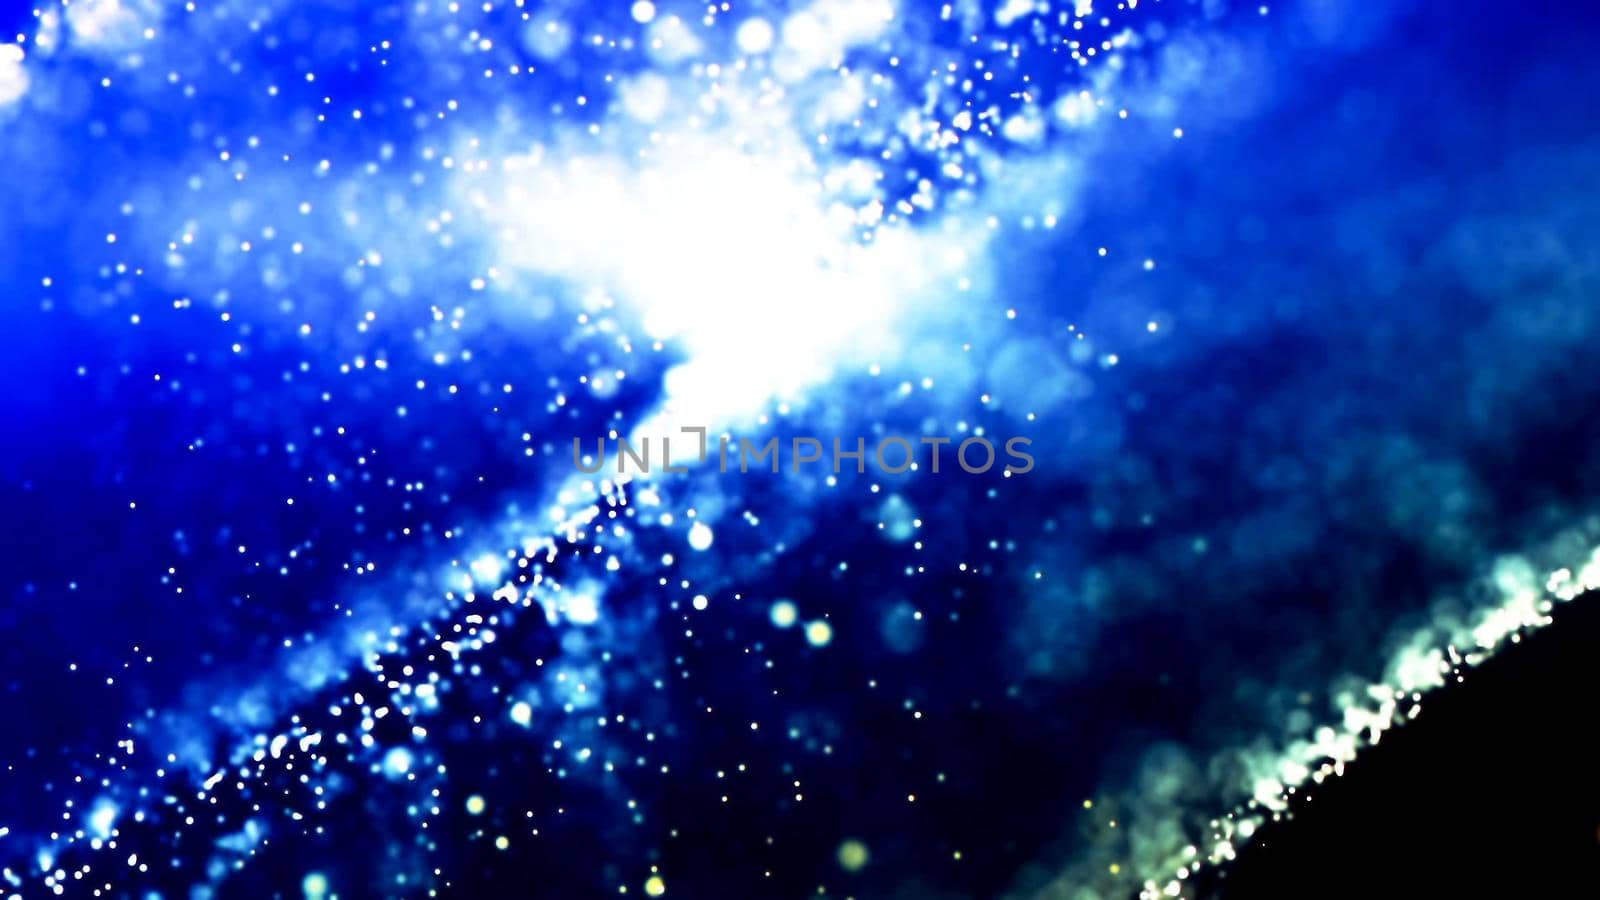 Background with nice blue abstract 3D rendering by designprojects